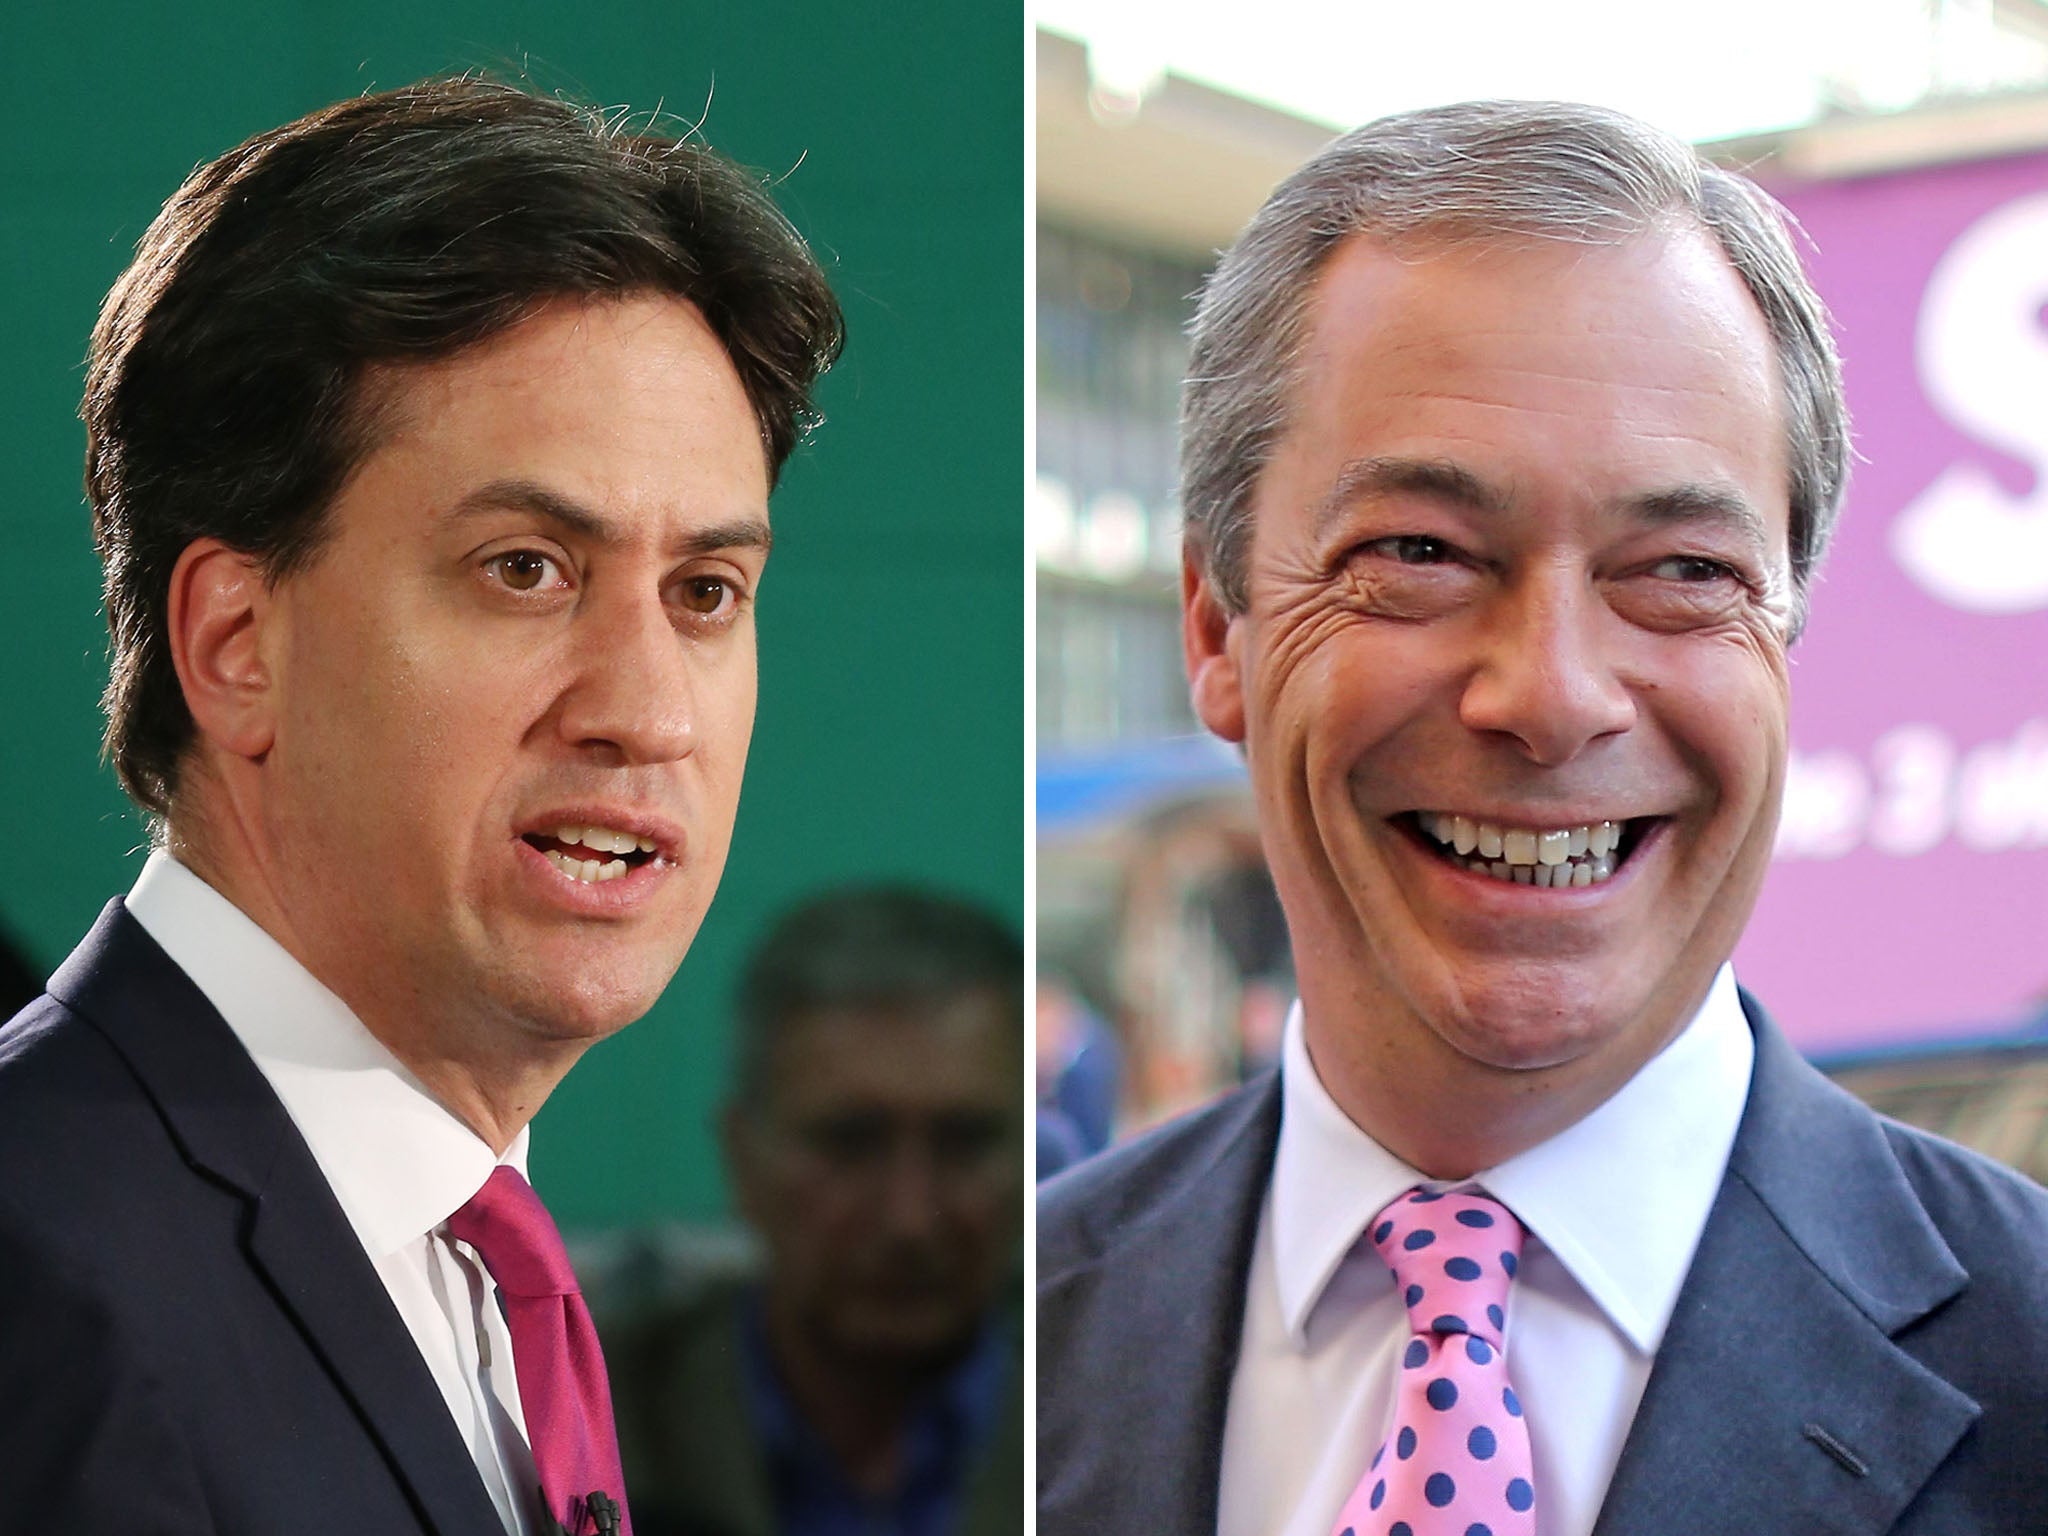 Ed Miliband has criticsed Ukip while on the campaign trail in Crawley